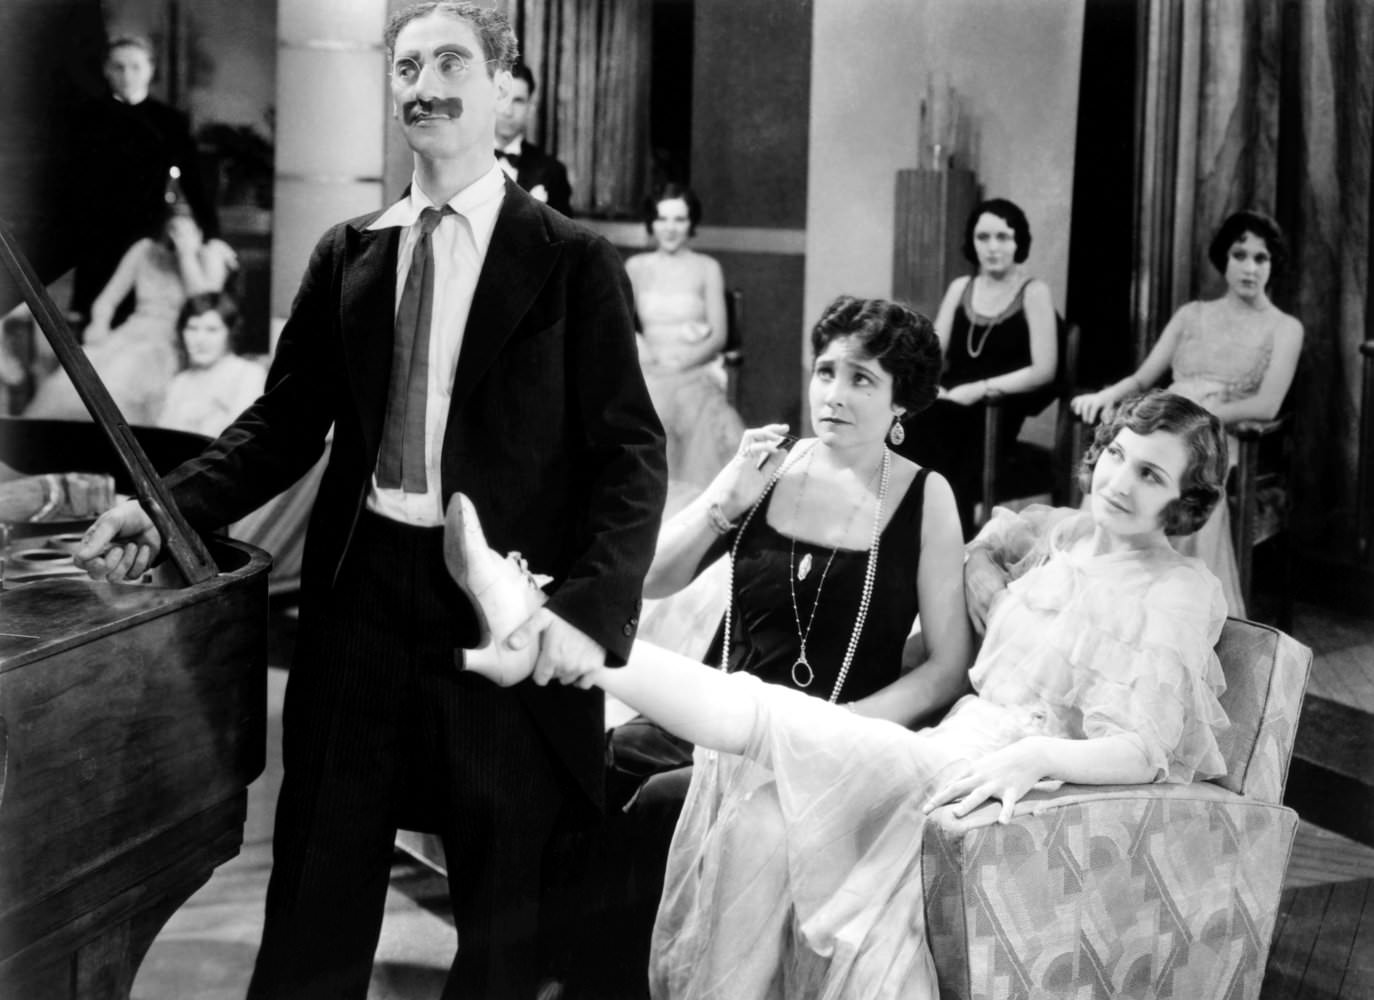 Groucho Marx, Margaret Dumont and Lillian Roth in Animal crackers, 1930